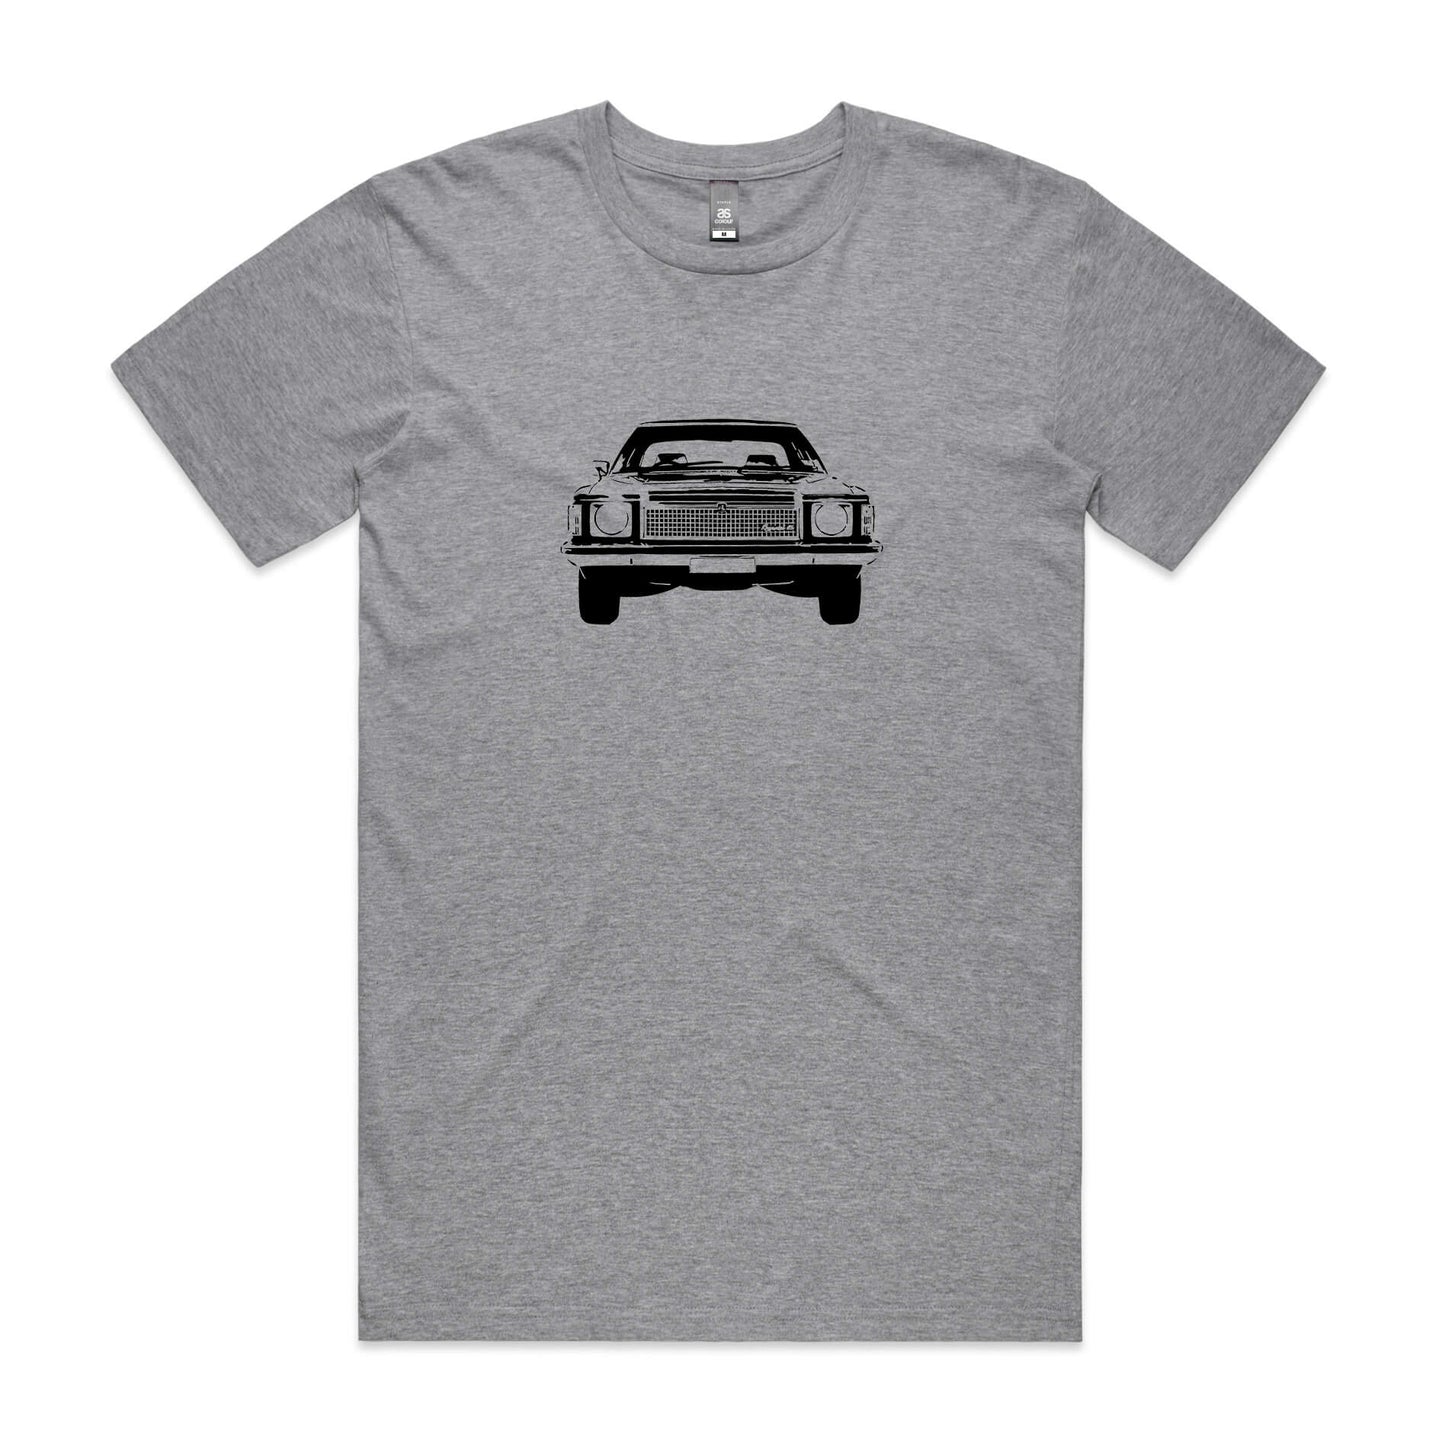 Holden HZ Kingswood t-shirt in grey with black car silhouette graphic